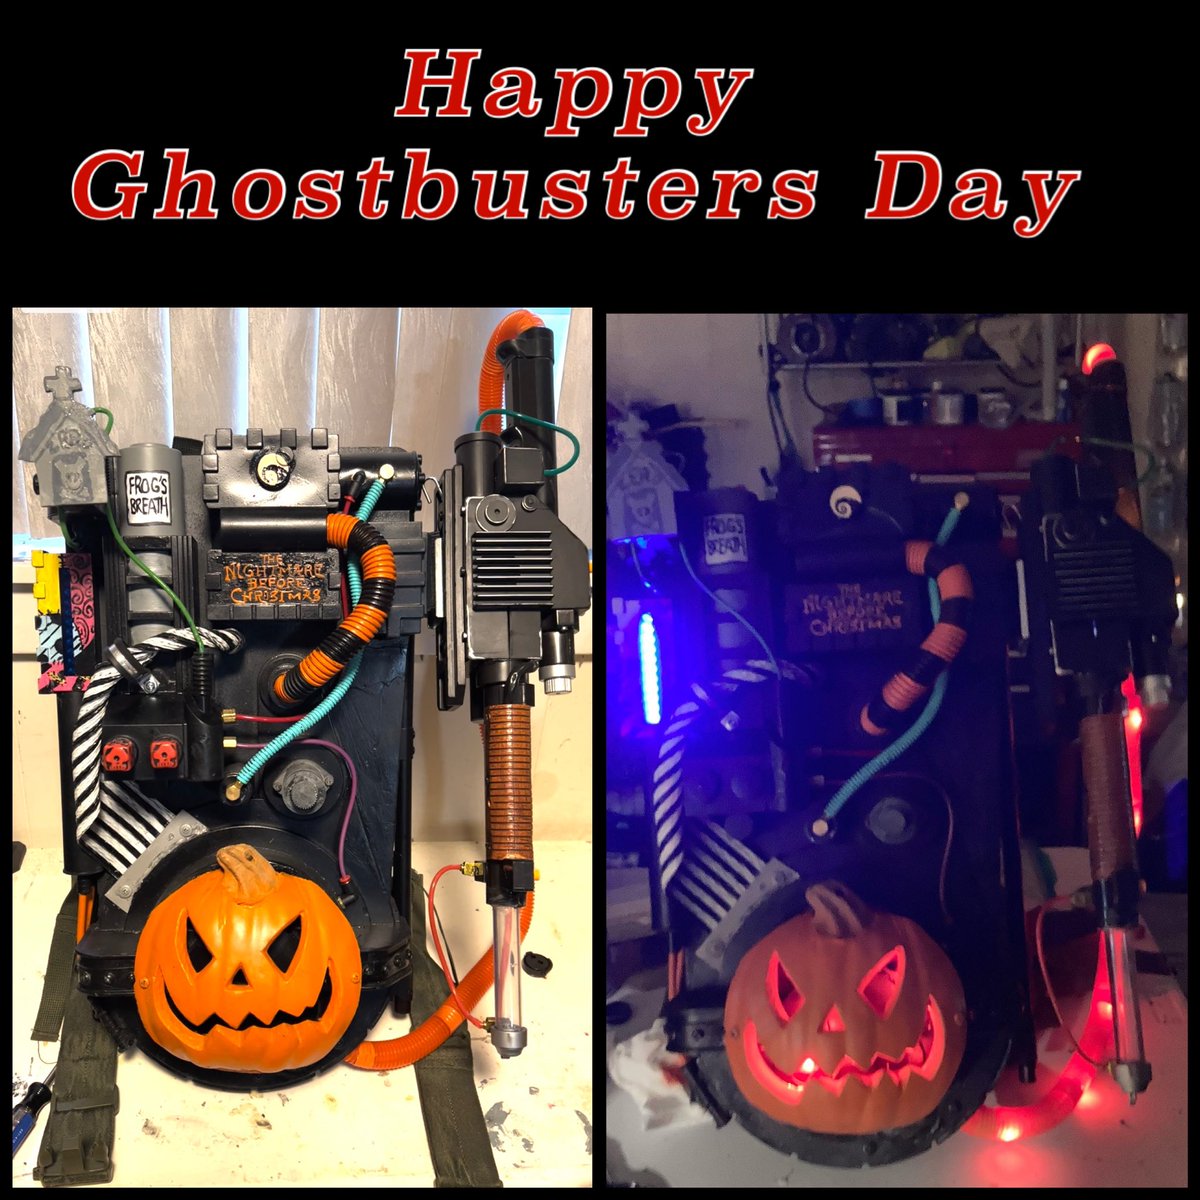 #ghostbustersday  @dan_aykroyd @Ernie_Hudson @JasonReitman @anniepotts  hey everyone happy ghostbusters day

I made it myself . This is my cross over spirit Halloween ghostbusters proton pack of ghostbusters and nightmare before Christmas.